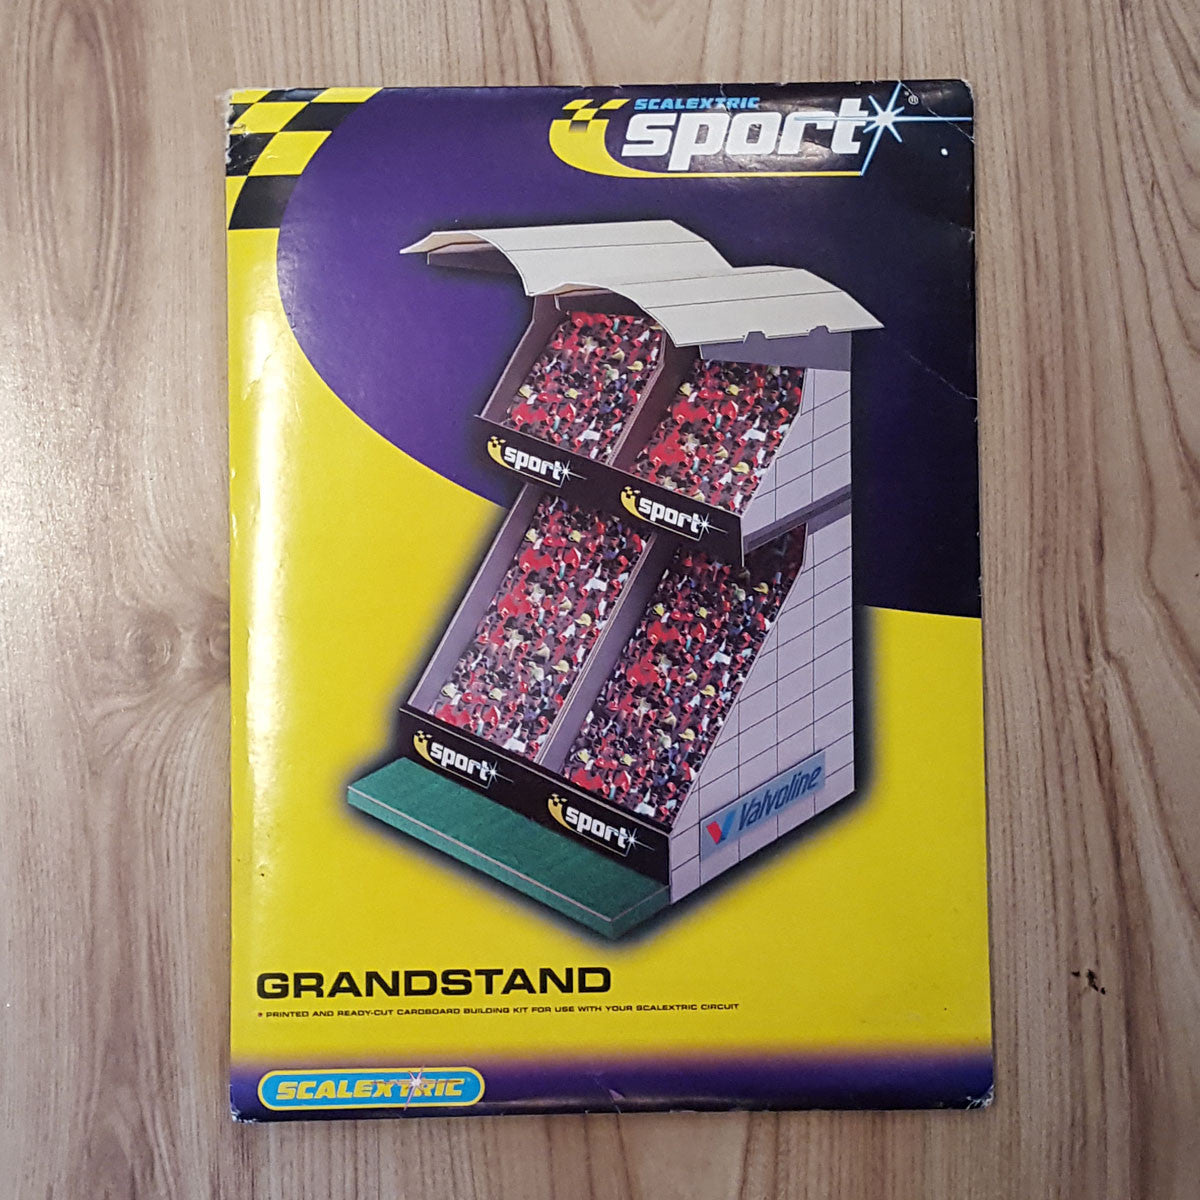 Scalextric 1:32 Building - C8152 Grandstand - Action Slot Racing